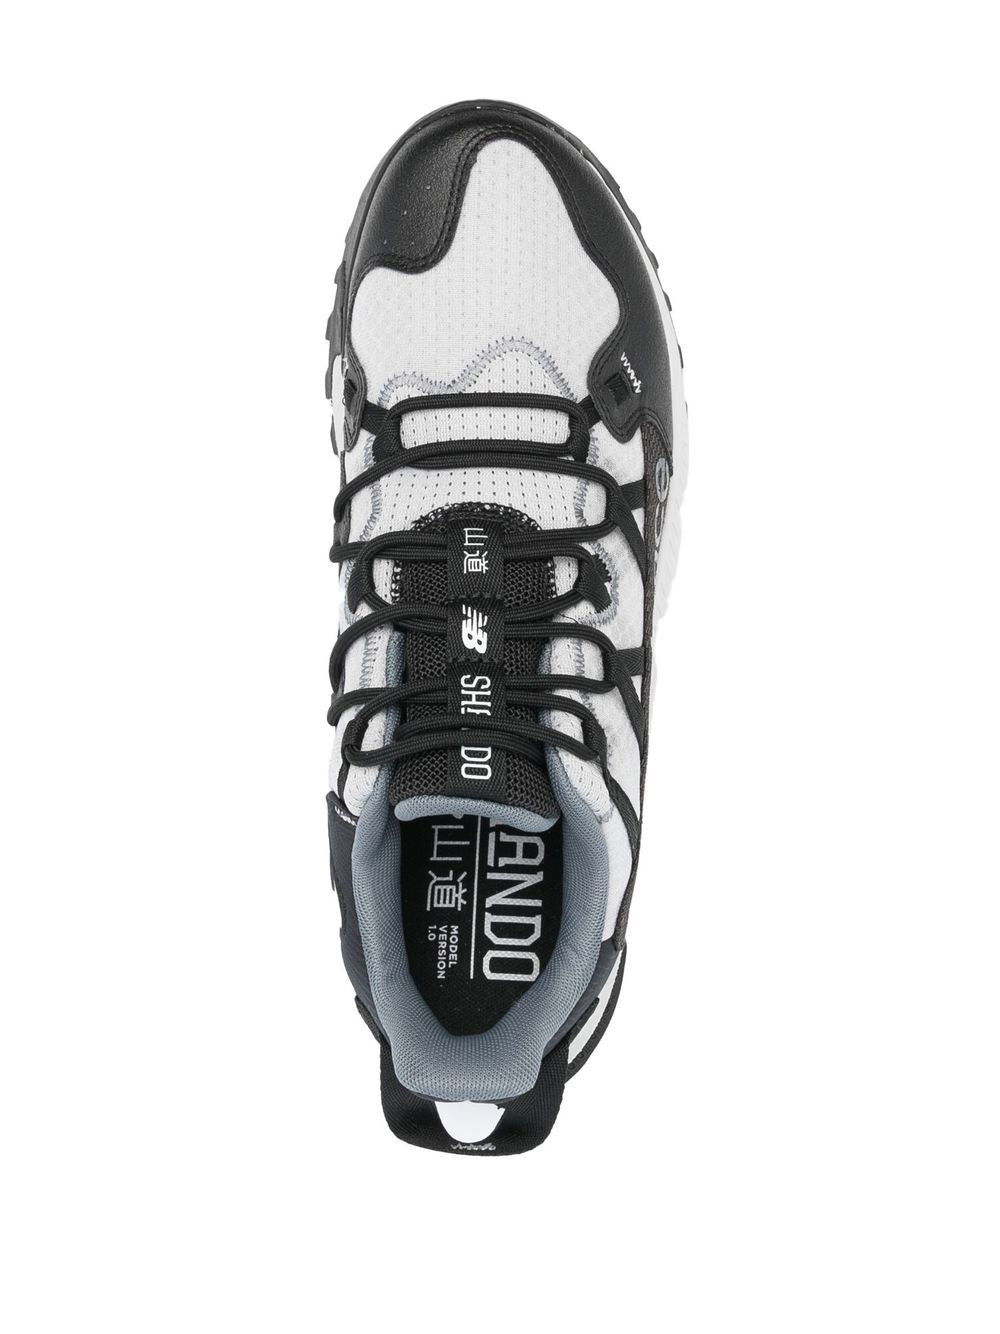 Black/white lace-up low-top trainers